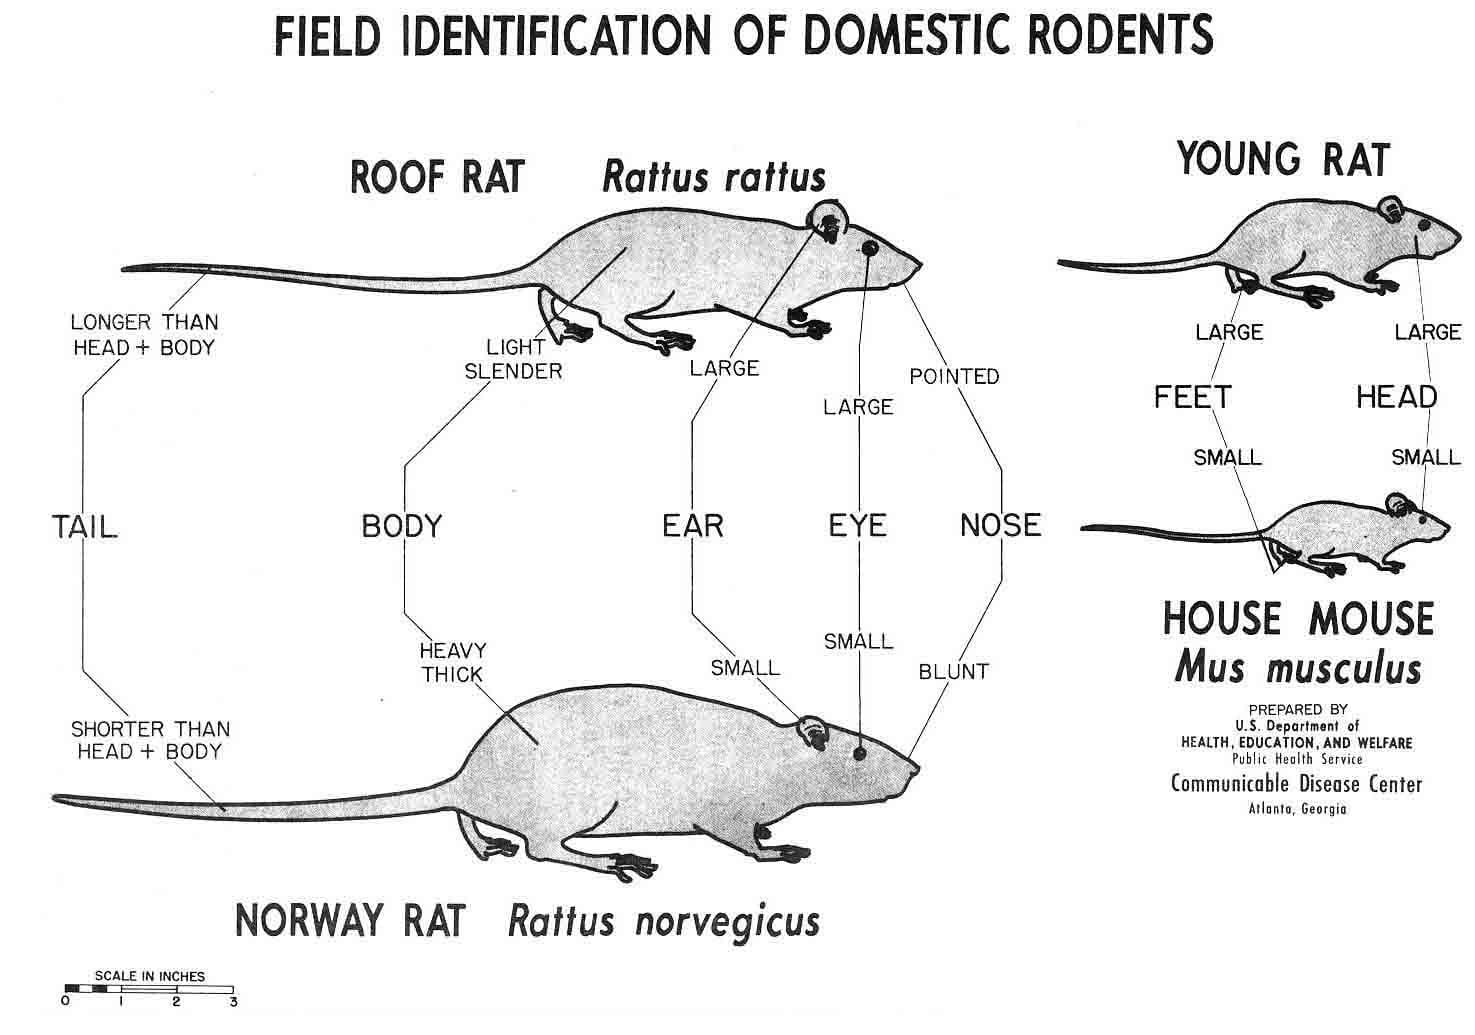 An image comparing various different rodent pests.